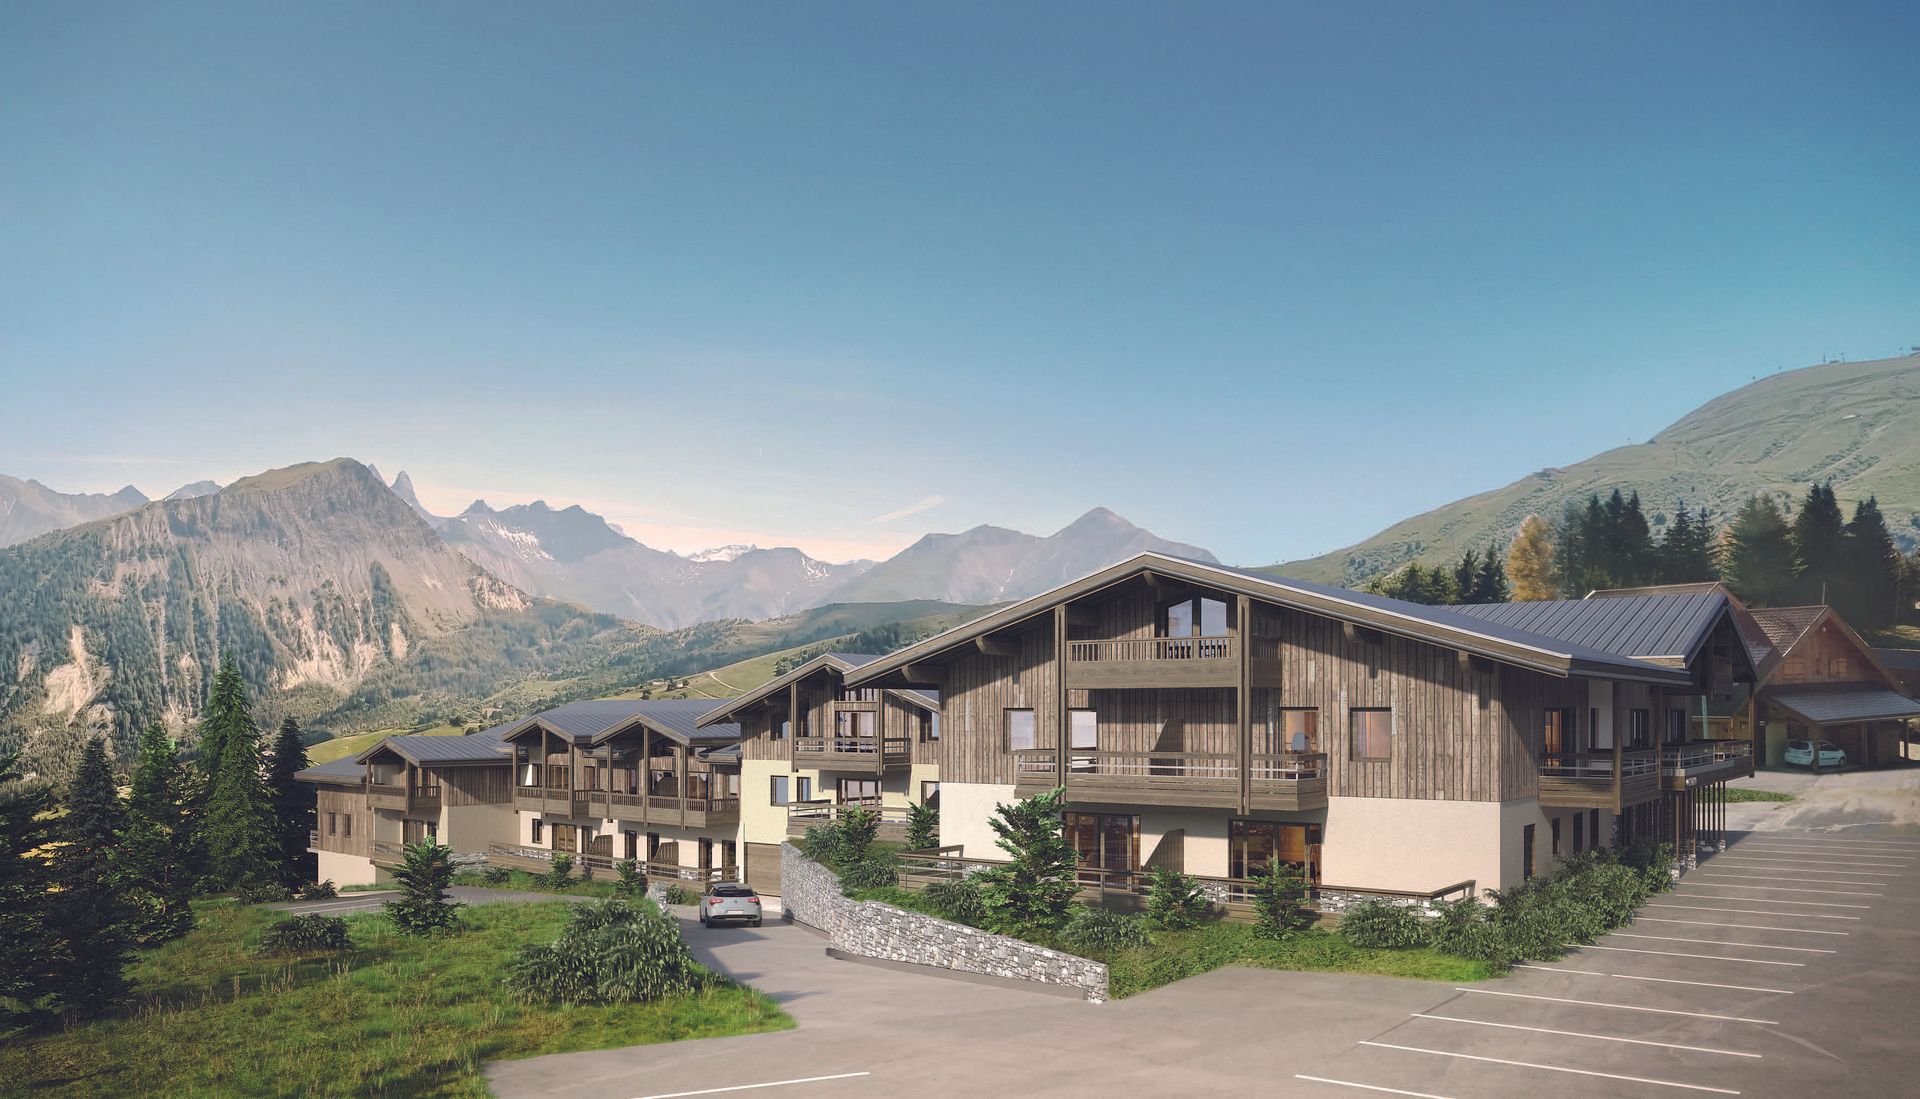 3 bed Apartment For Sale in Les Les Sybelles, French Alps